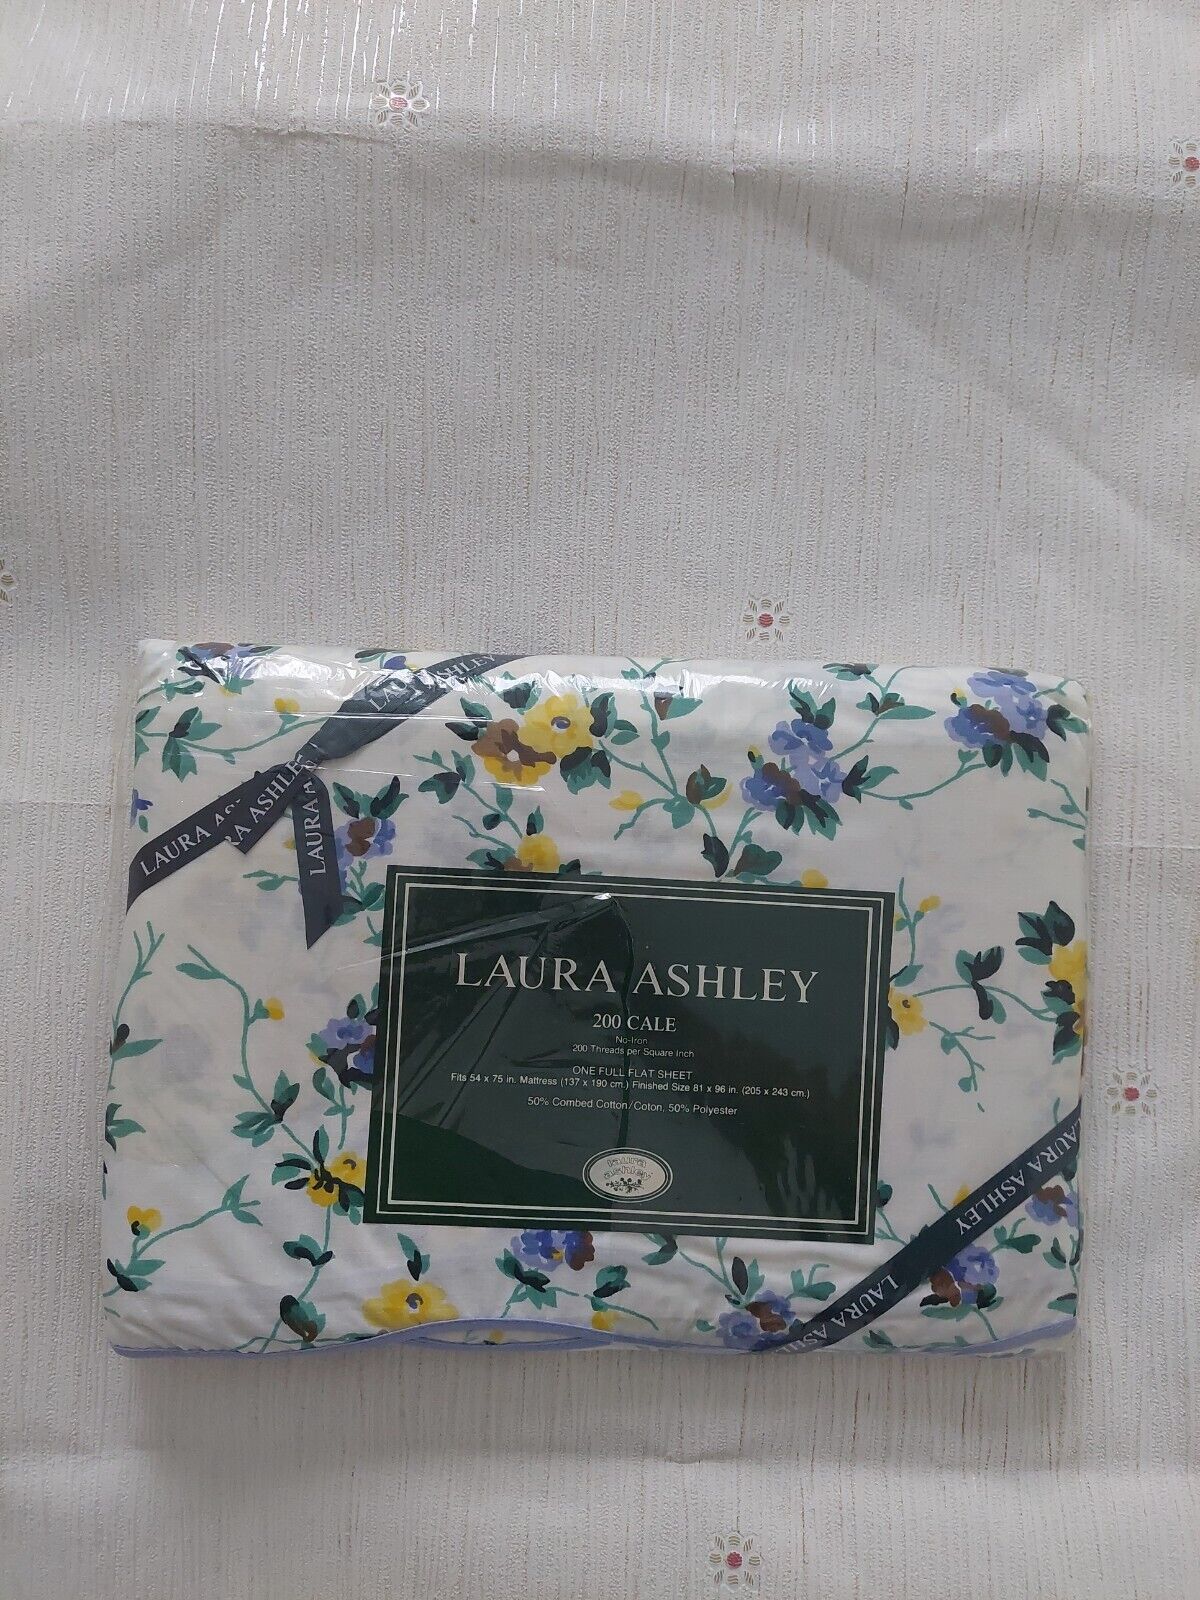 Laura Ashley Polyanthus Sapphire Vintage Floral One Full Double Flat Sheet (200)